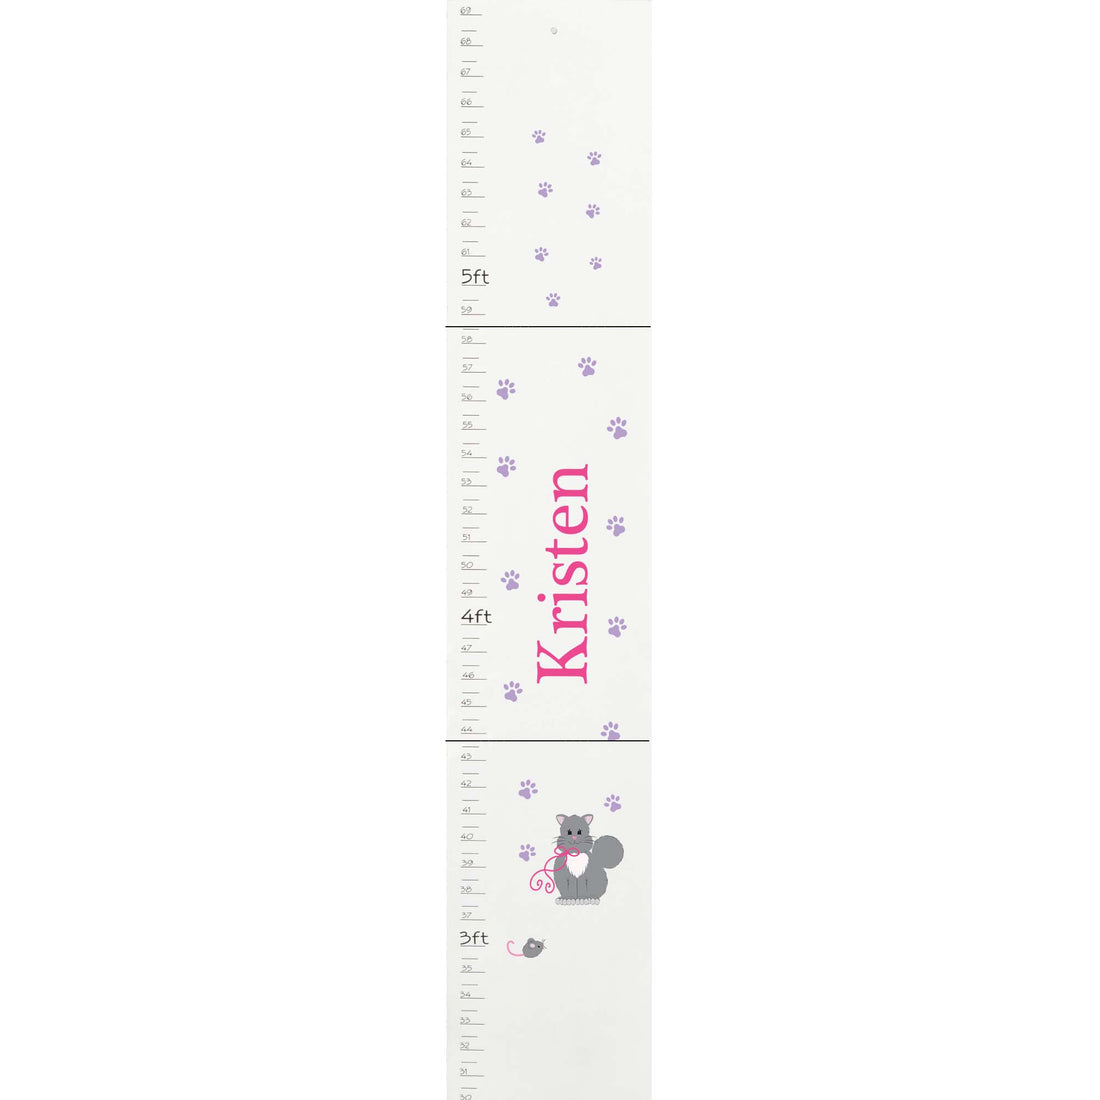 Personalized White Growth Chart With Kitty Cat Design